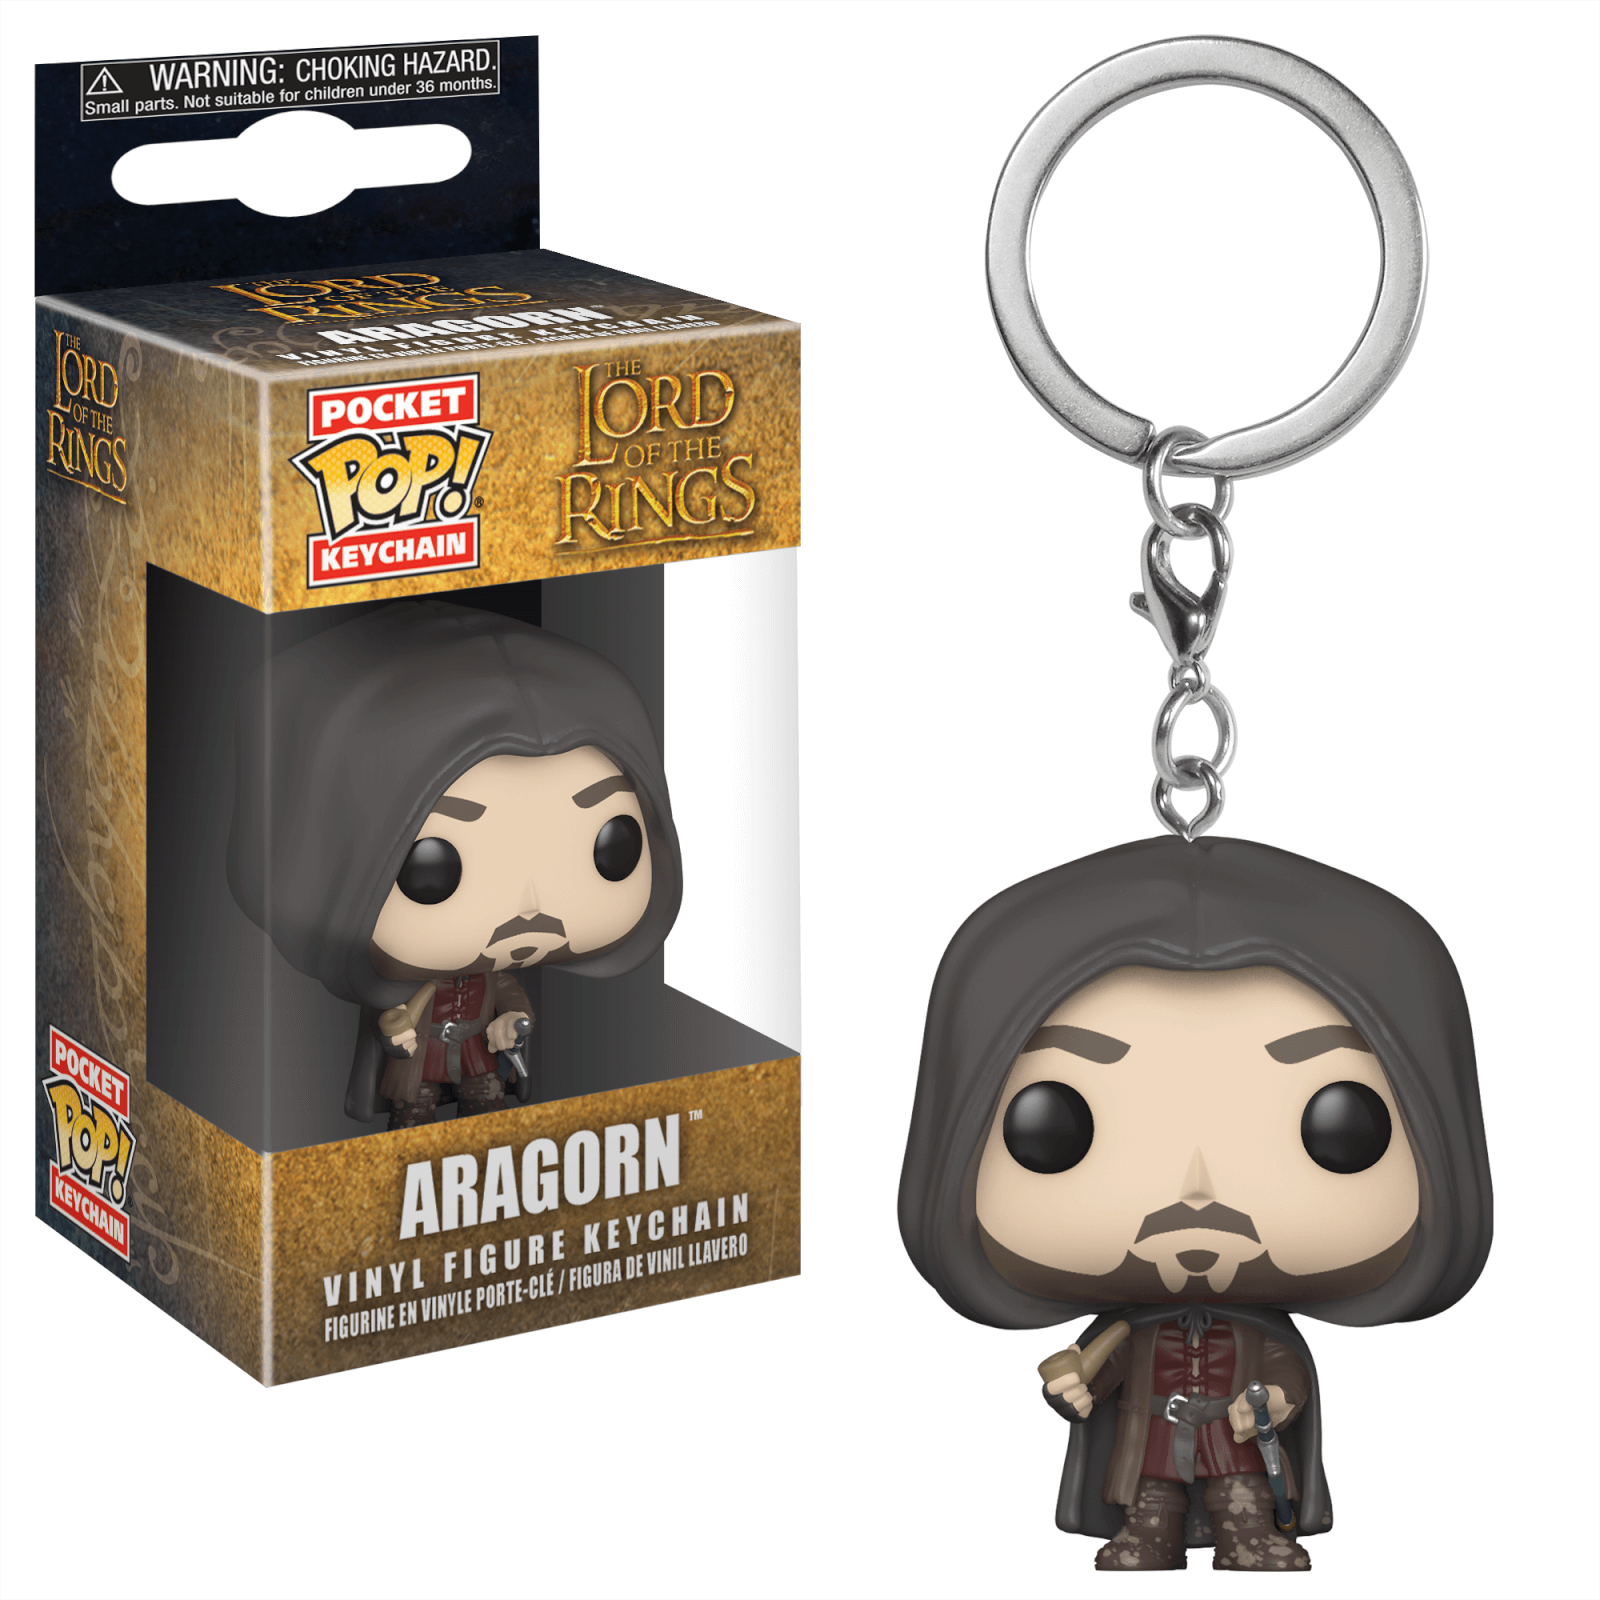 Lord of the Rings Aragorn Pop! Keychain